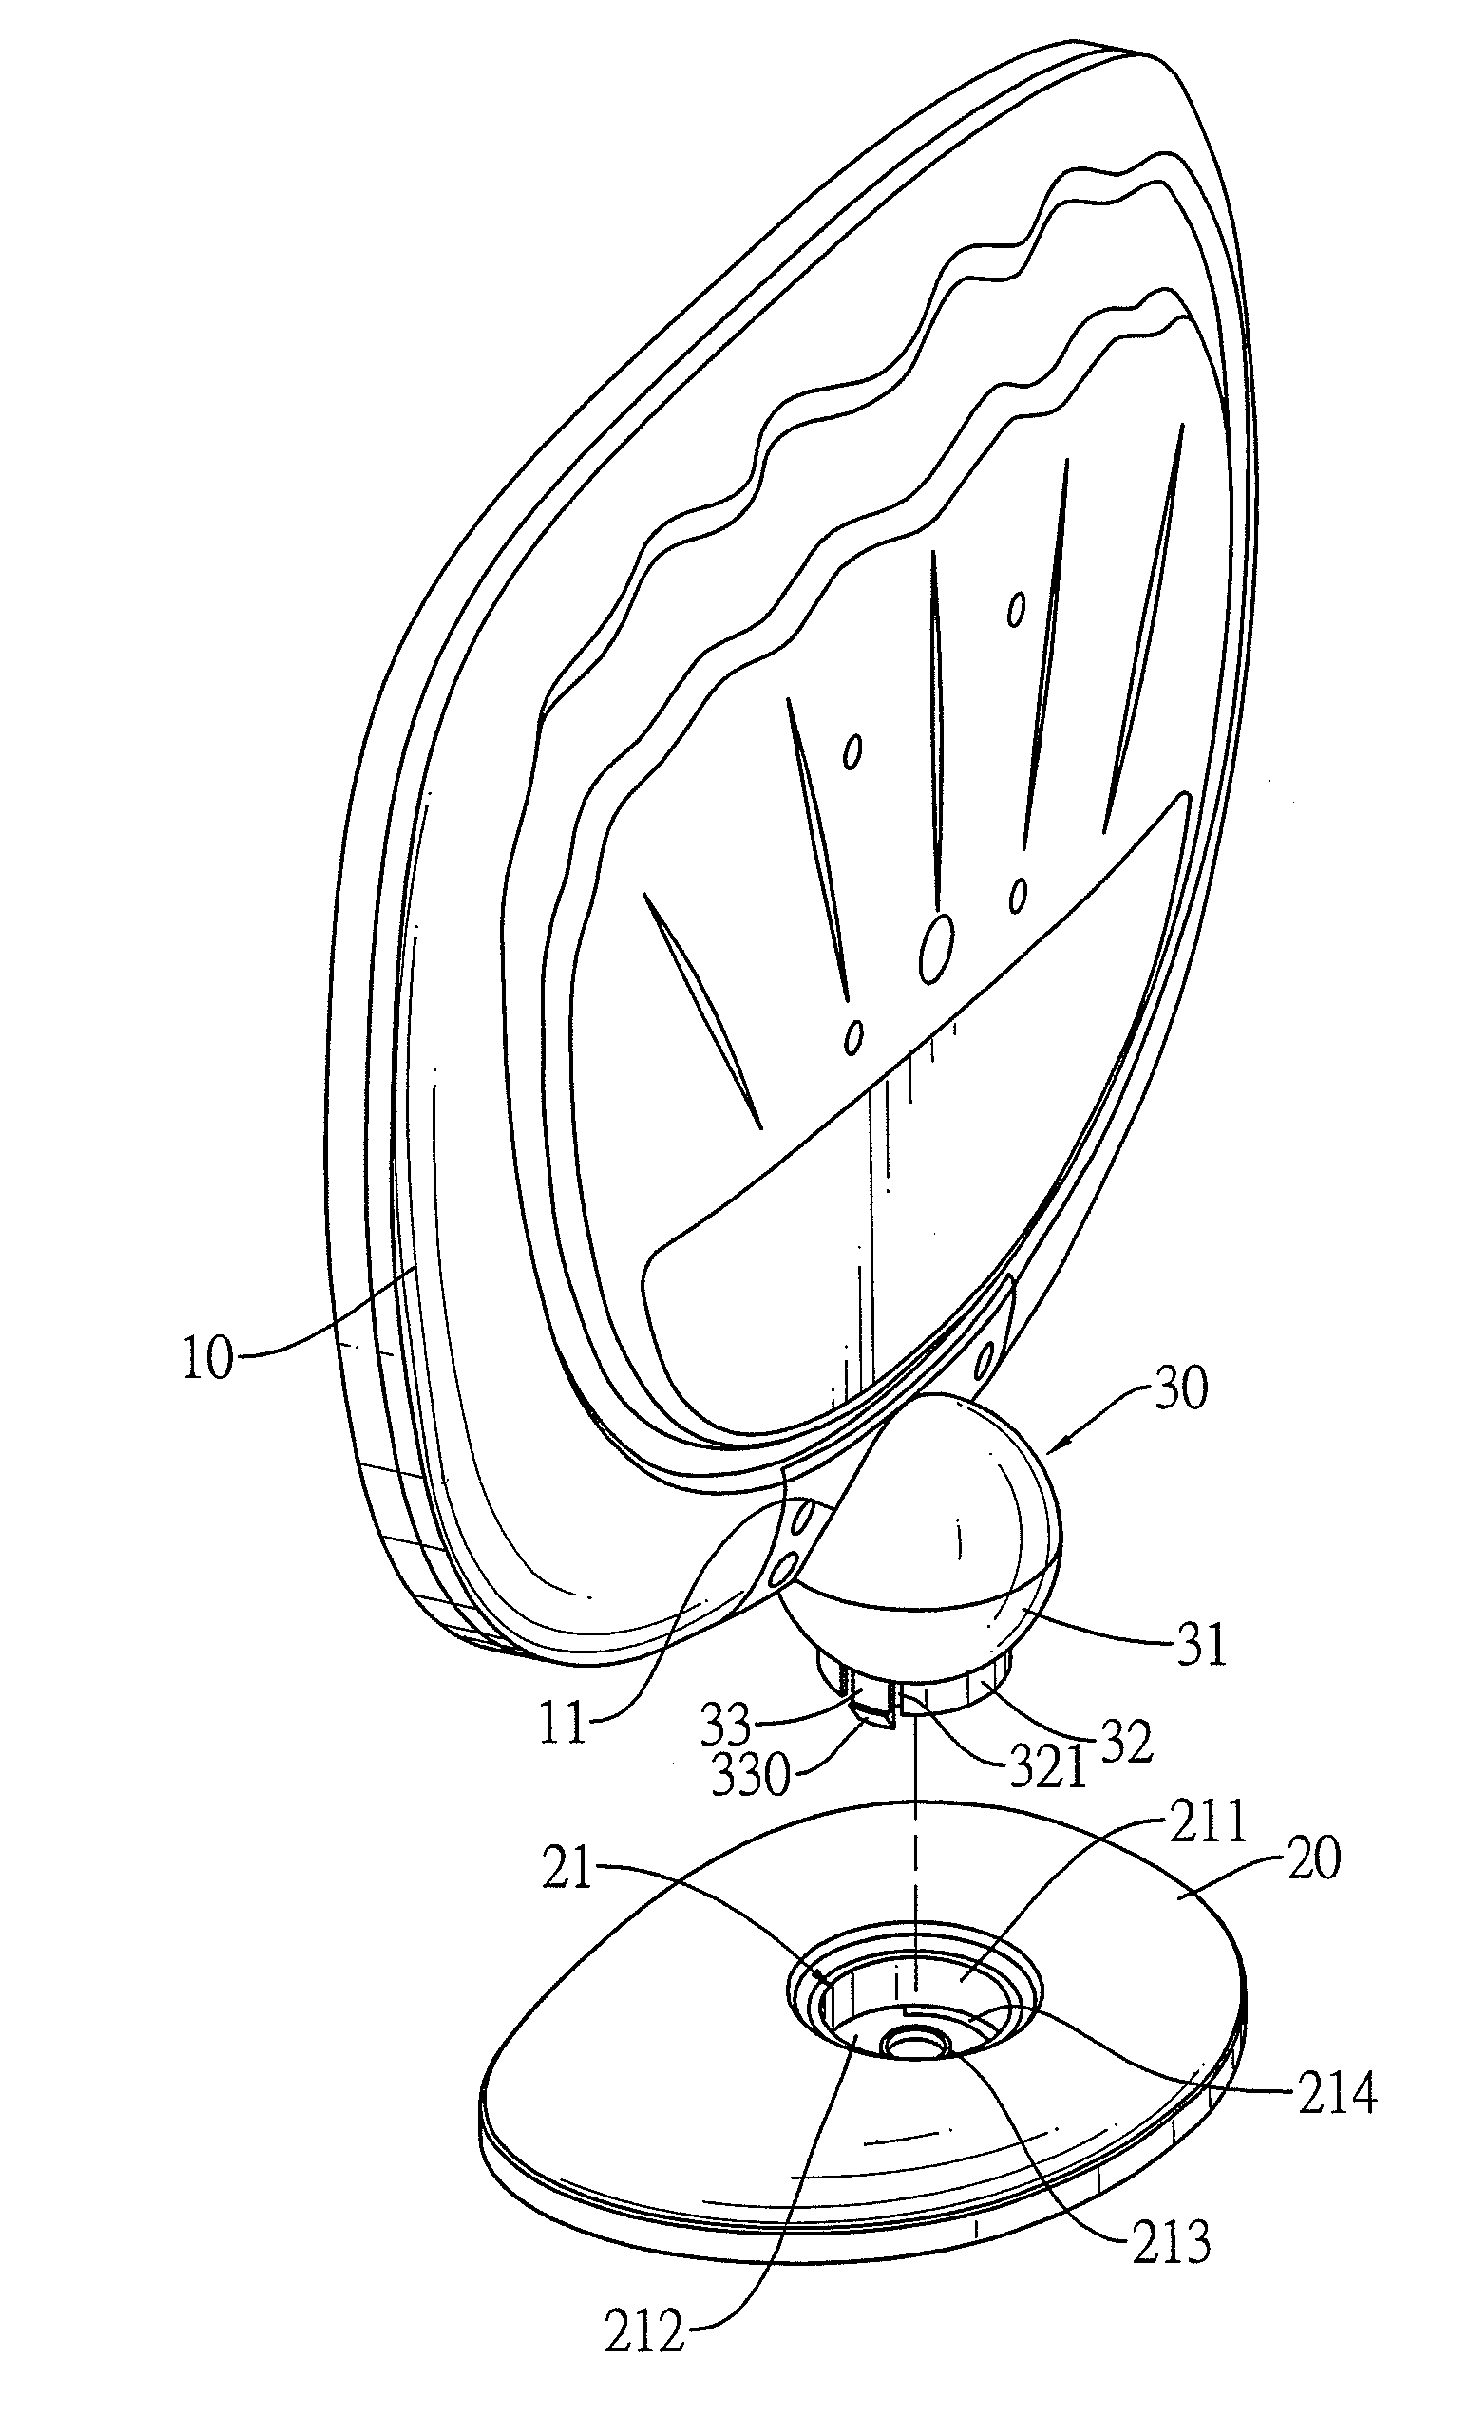 Display and detachable base assembly thereof